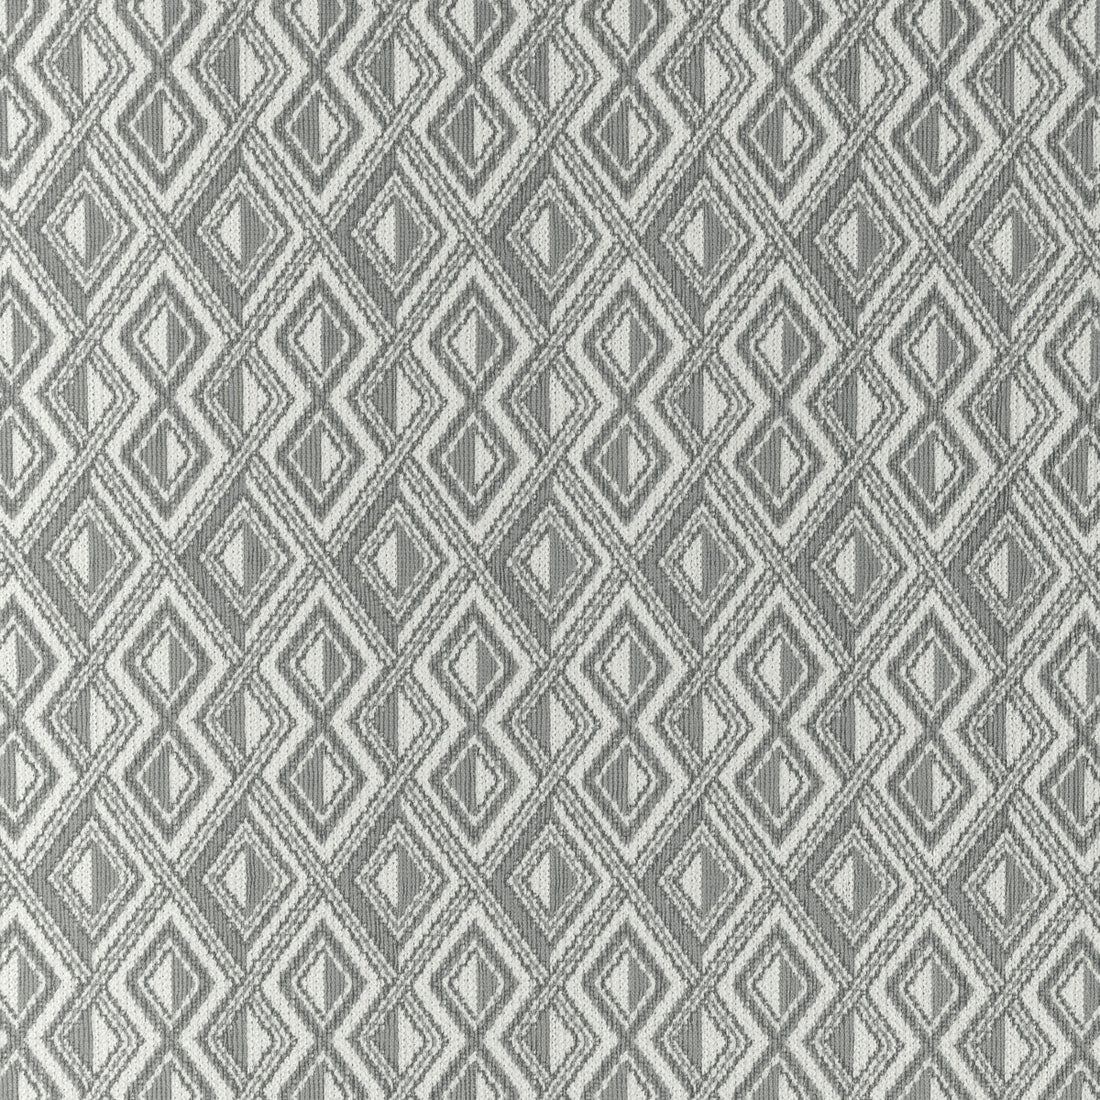 Rough Cut fabric in moon color - pattern 37058.11.0 - by Kravet Design in the Thom Filicia Latitude collection